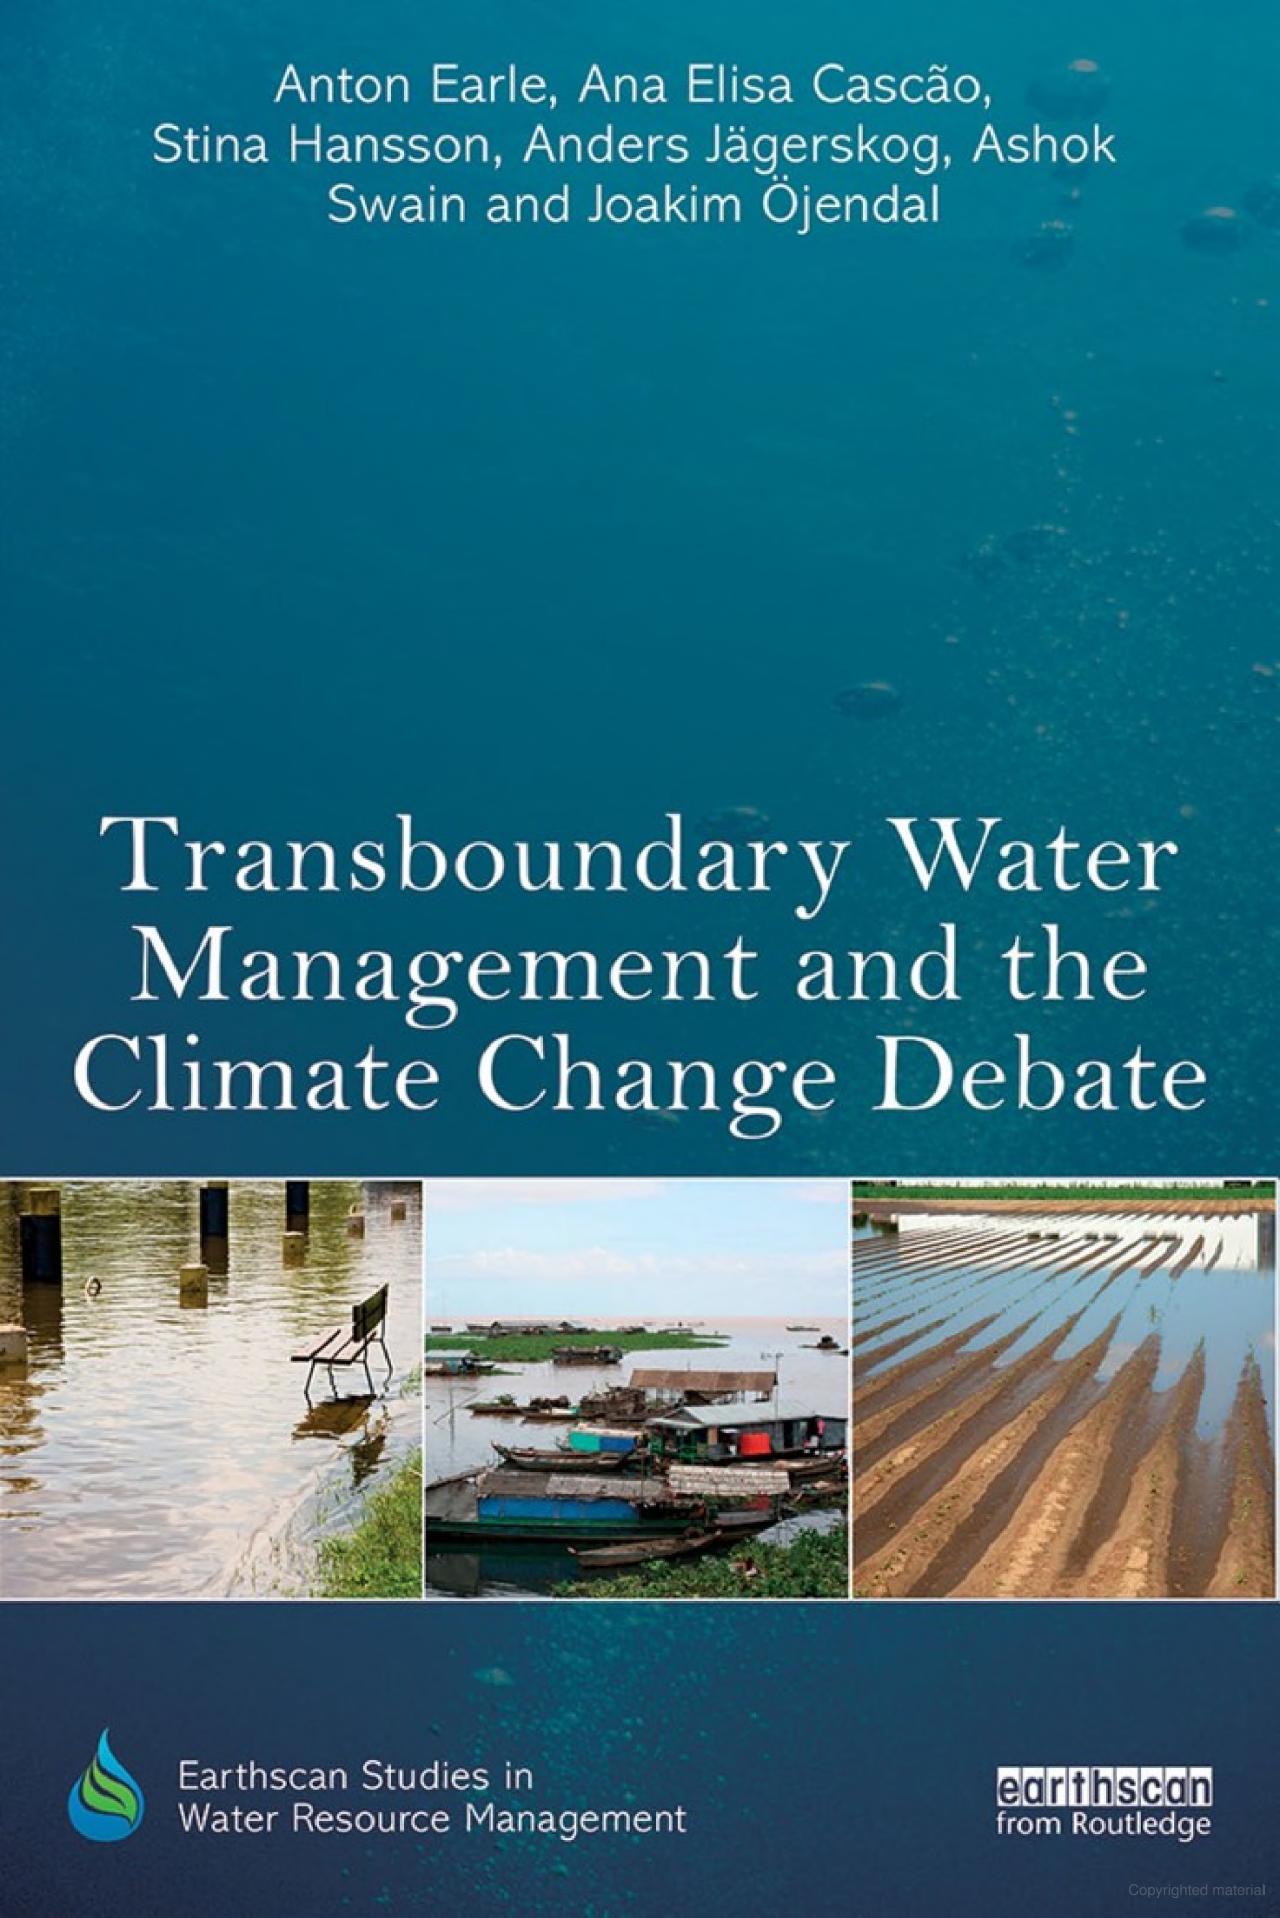 Transboundary water management and the climate change debate